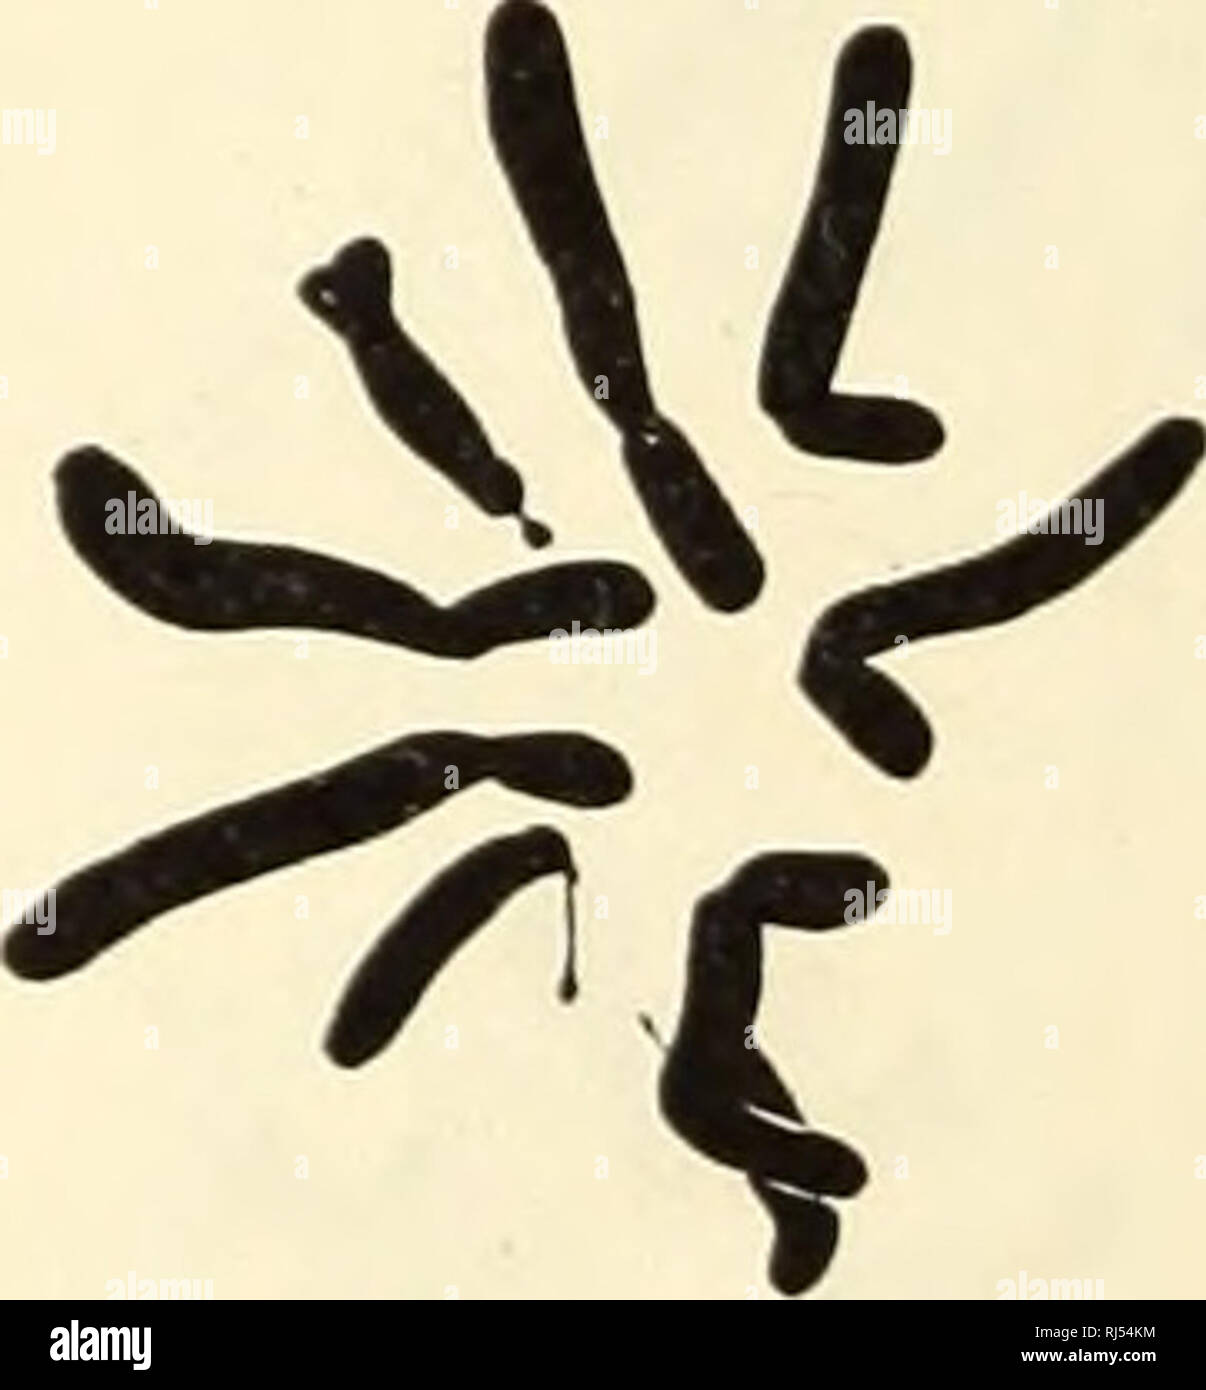 . Chromosomes and phylogeny in Crepis. Crepis; Plants; Chromosomes. C. rubra 1506 c. rubra 1176 a b Figure 3. Crepis aspera, C. bursif cilia, C. setosa, and C. senecioides (fig. 4). with 8 chromosomes each, are quite different in details of their chro- mosome morphology. C. setosa is characterized by the presence of a pair of large satellites and C. senecioides is outstanding among the 8-chromosome species by the small size of its chromosomes.. C. aspera C. bursifolia a b C. setosa C. senecioides c d Figure 4. Crepis bureniana, C. aculeata, and C. amplexifolia (fig. 5) with 8 chromosomes, are  Stock Photo